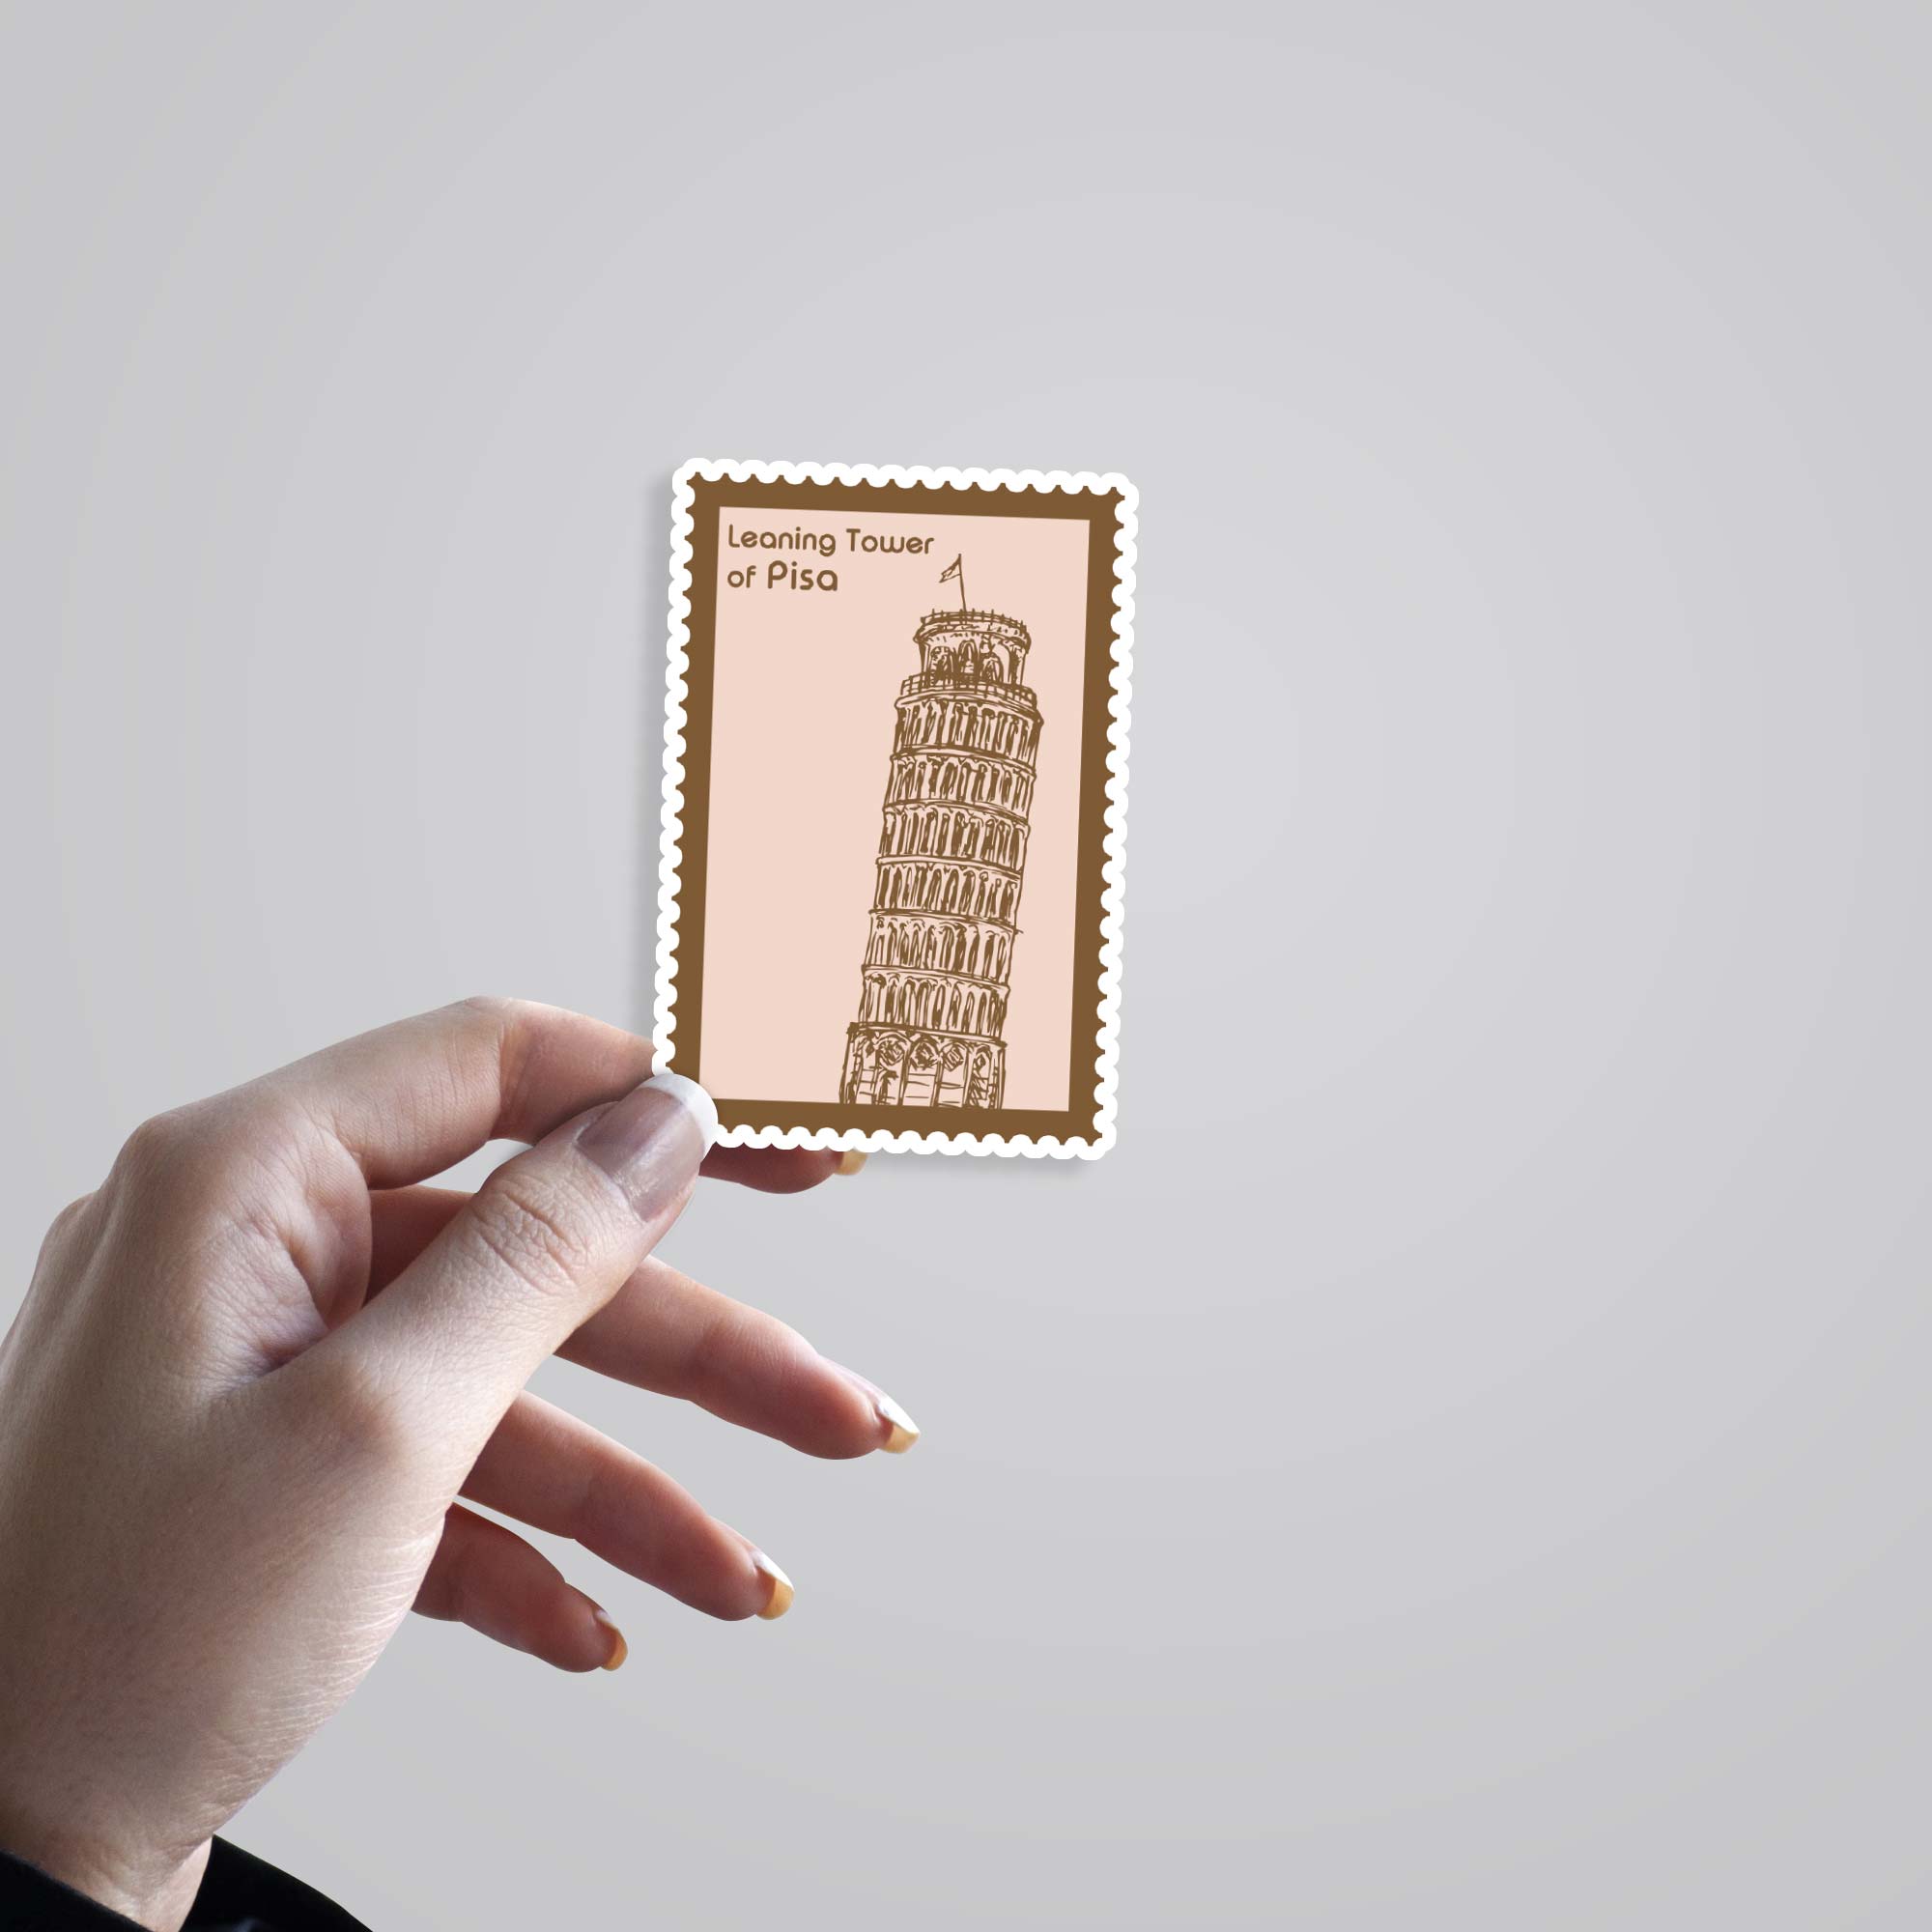 Leaning tower of Pisa Stamp Travels Stickers